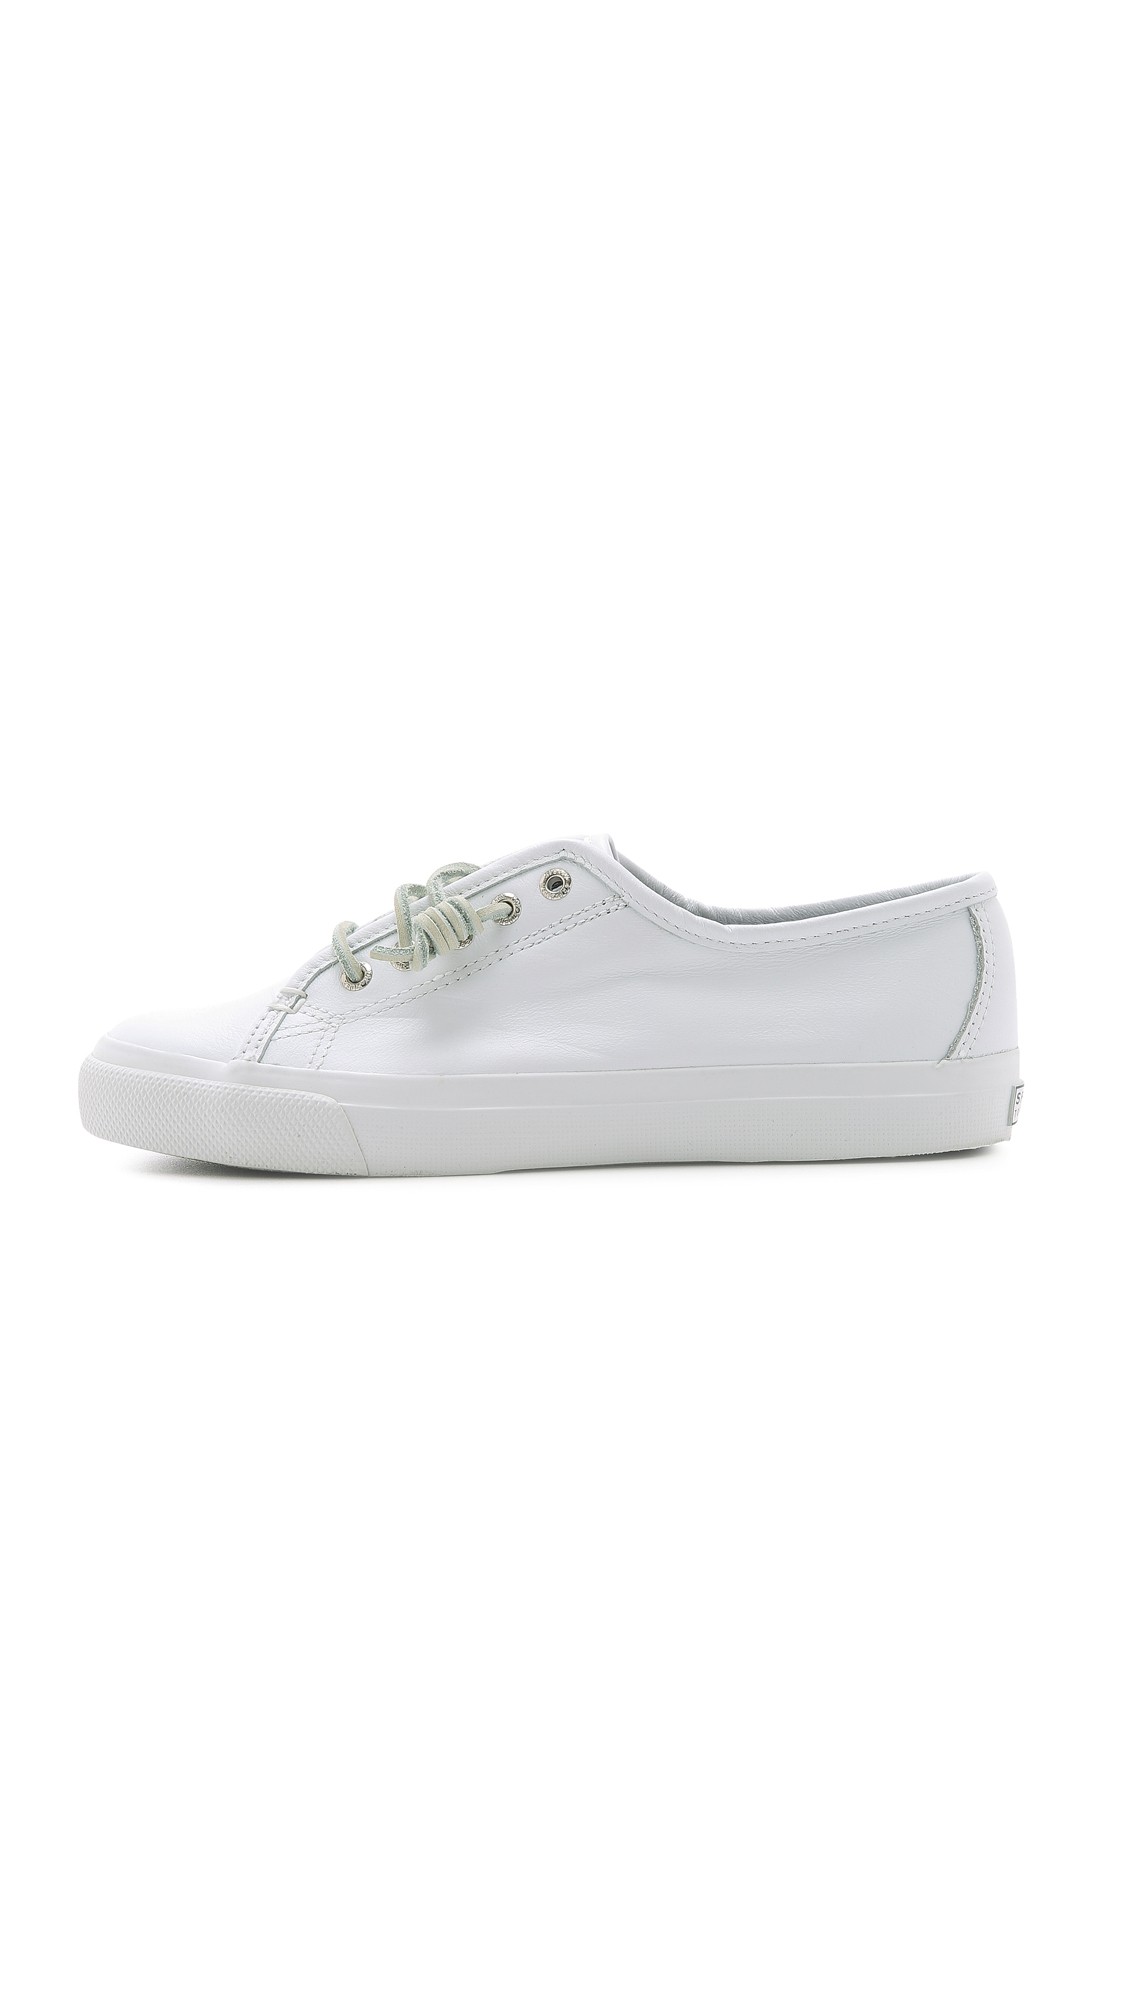 Sperry Top-Sider Seacoast Leather Sneakers - White - Lyst